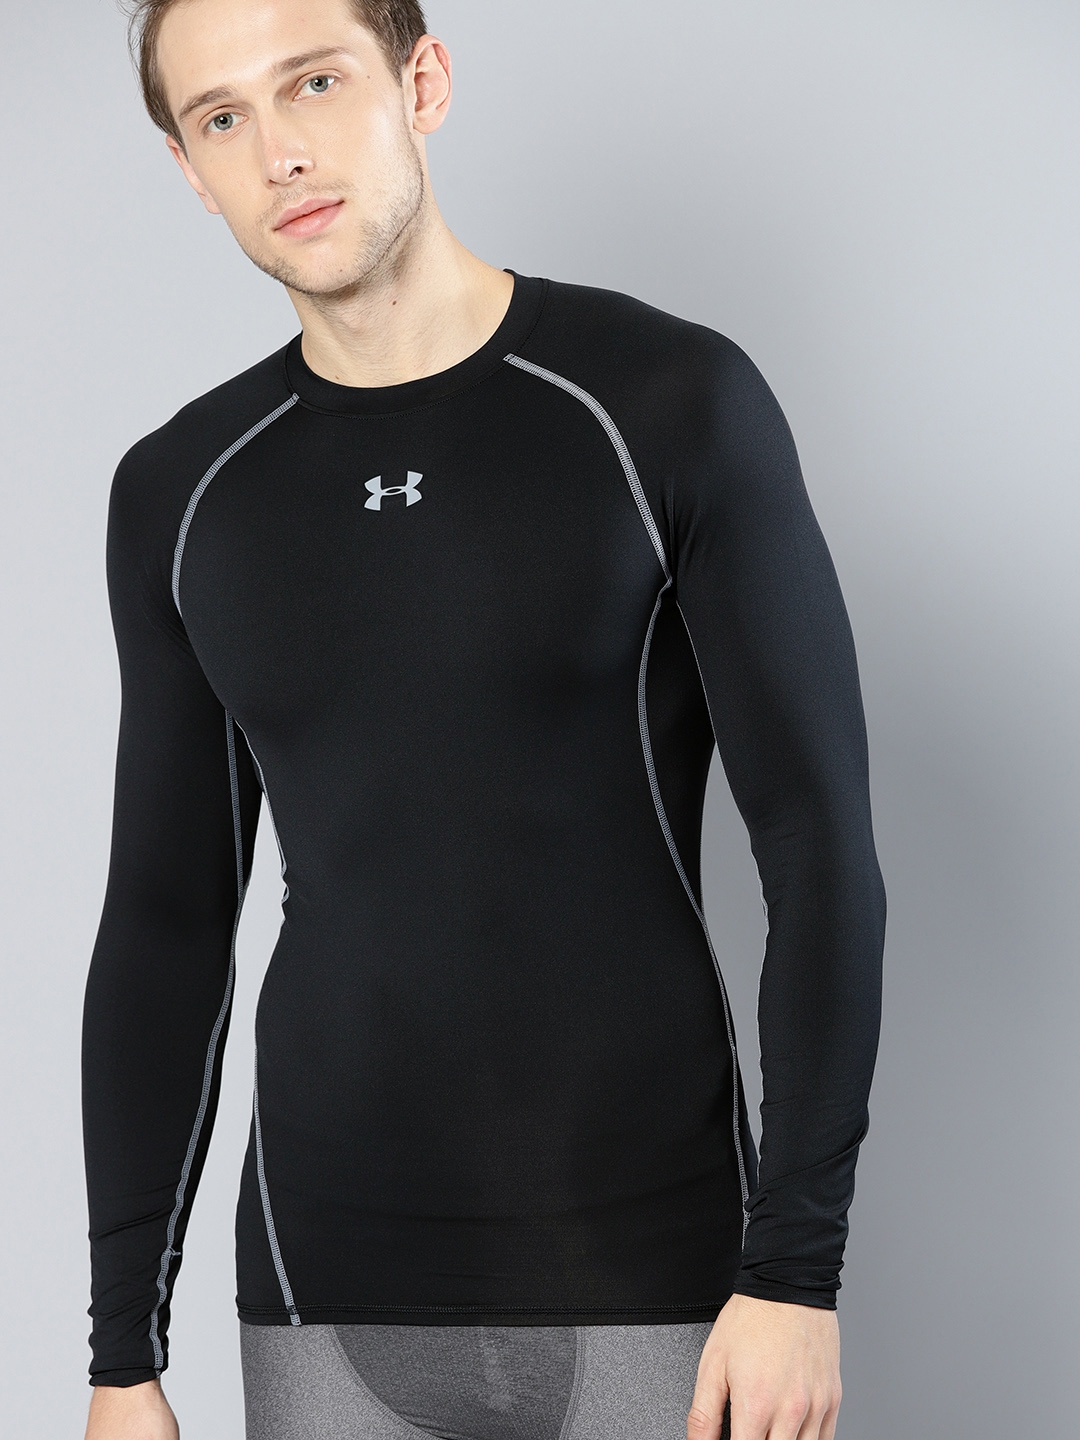 Men's Cool Dry Skin Fit Long Sleeve Compression Shirt Tight T-shirt Tops 